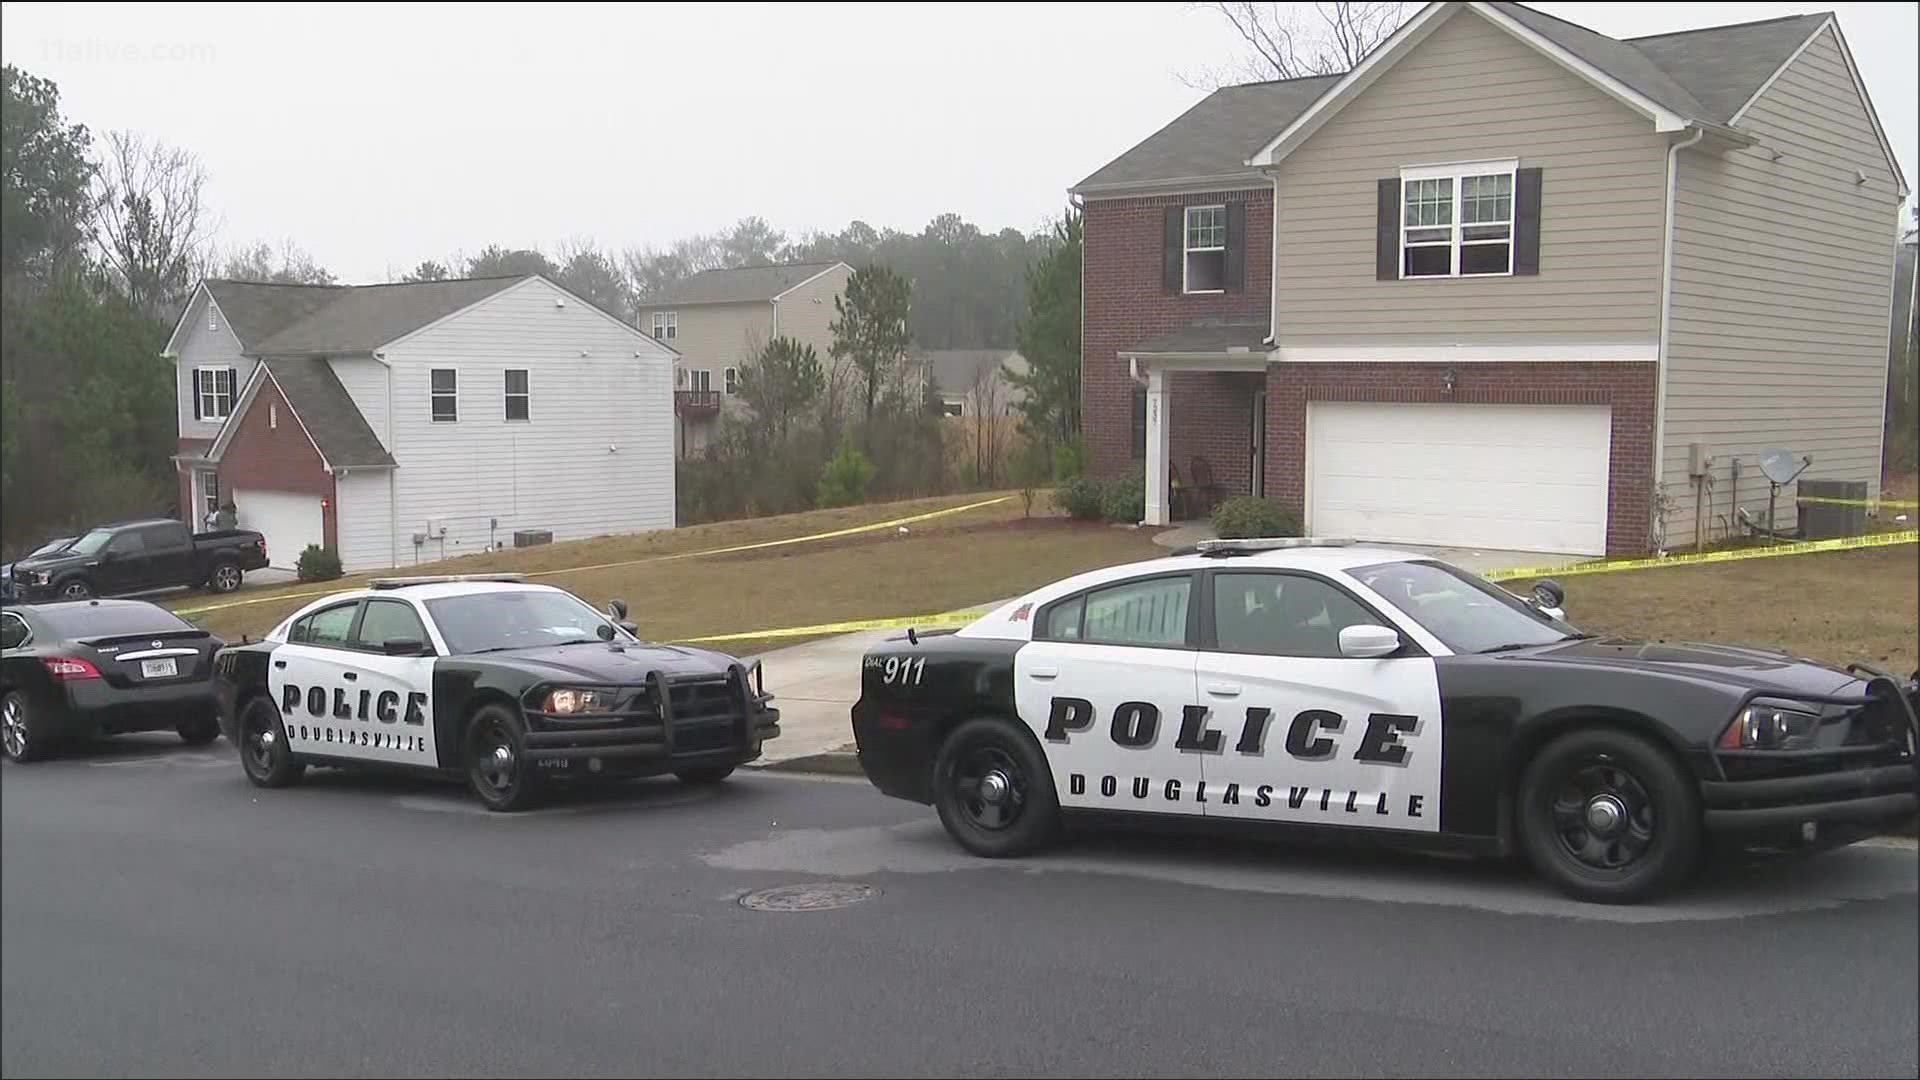 Police said it happened early Friday morning at a rental property.